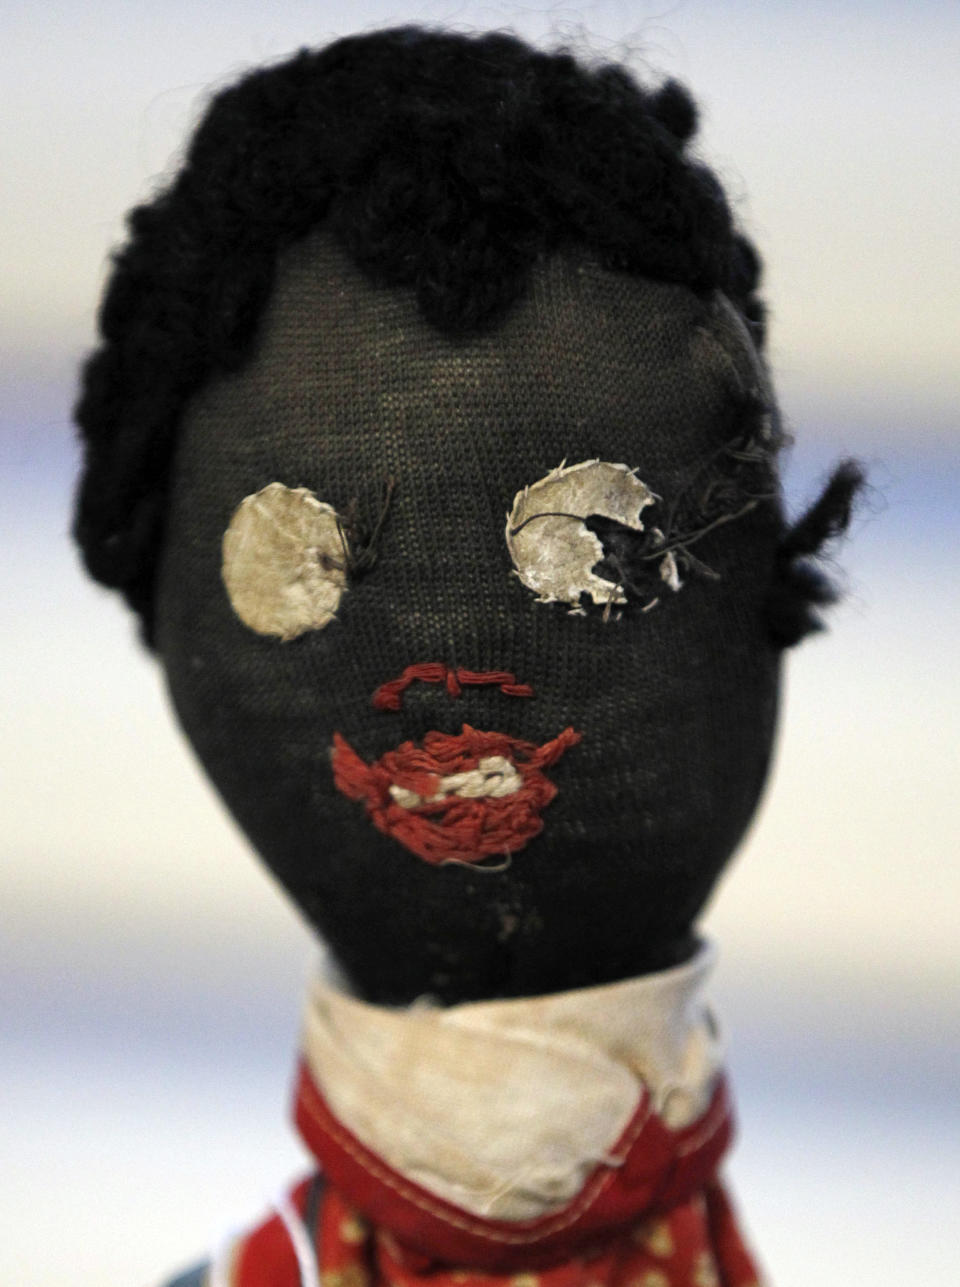 In this Wednesday, July 25, 2012 photo, an historic black cloth doll appears on display in New Orleans. Amid rare antique dolls crafted in porcelain, whimsical Kewpies and homage to contemporary icon Barbie, cloth dolls in the image of African-Americans drew special attention as more than 1,200 collectors gathered in New Orleans for the annual convention of the United Federation of Doll Clubs. (AP Photo/Gerald Herbert)